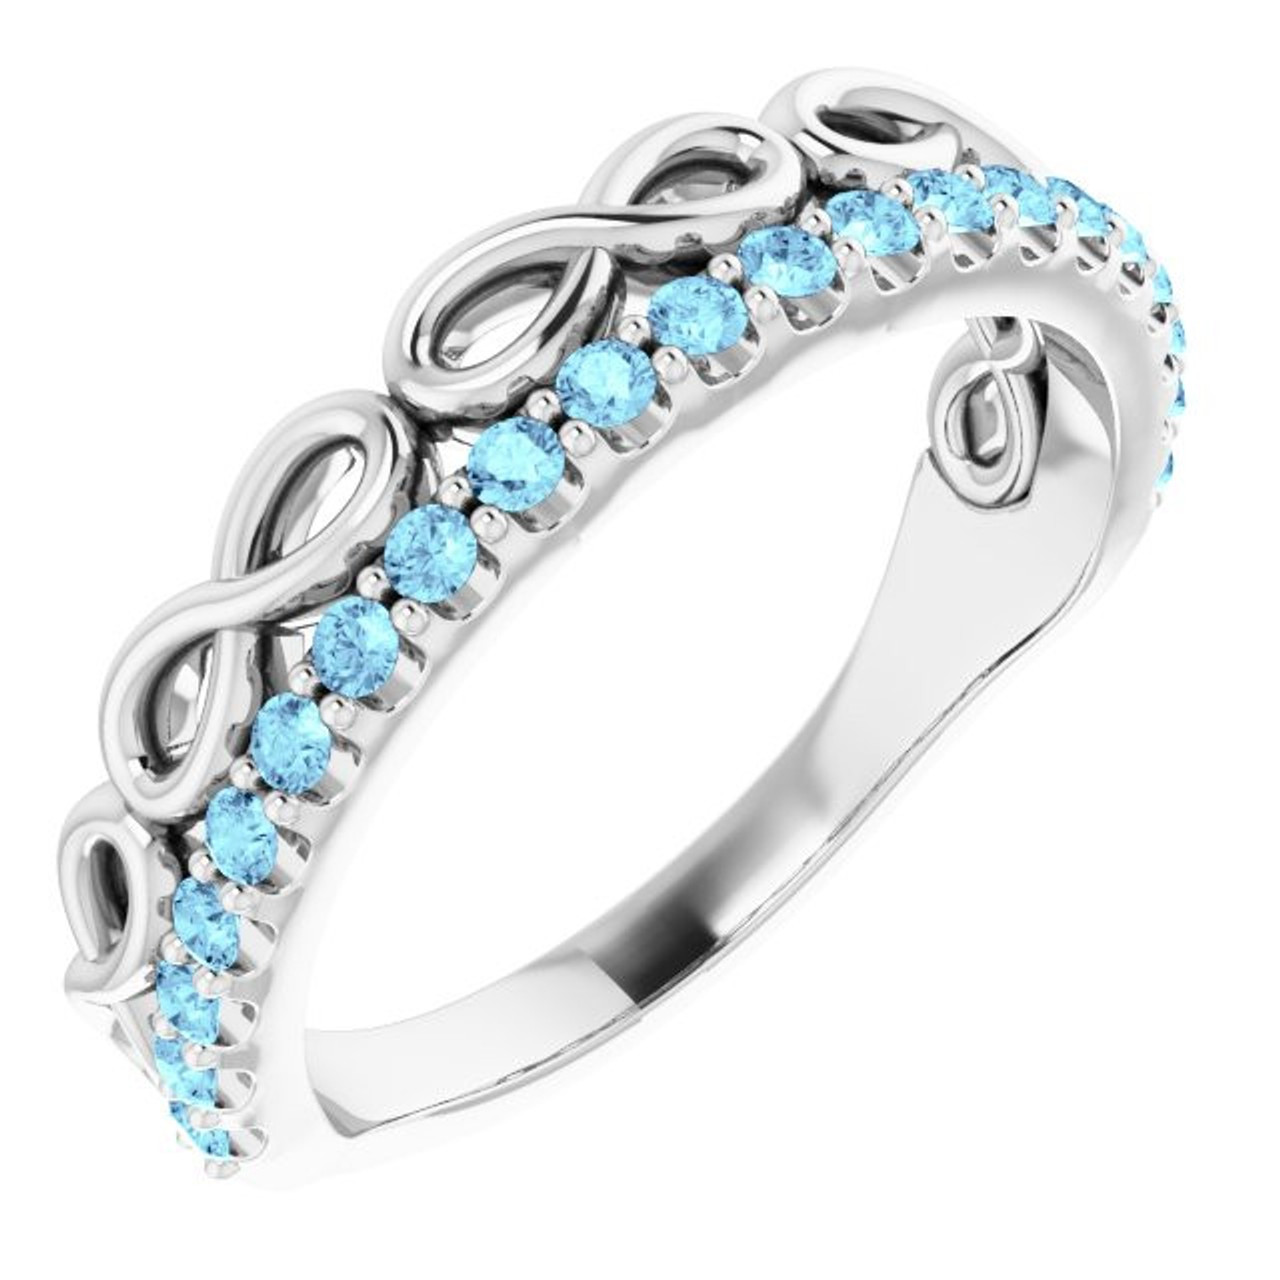 Oval cut Aquamarine Eternity Bands in Sterling Silver | Diamondere